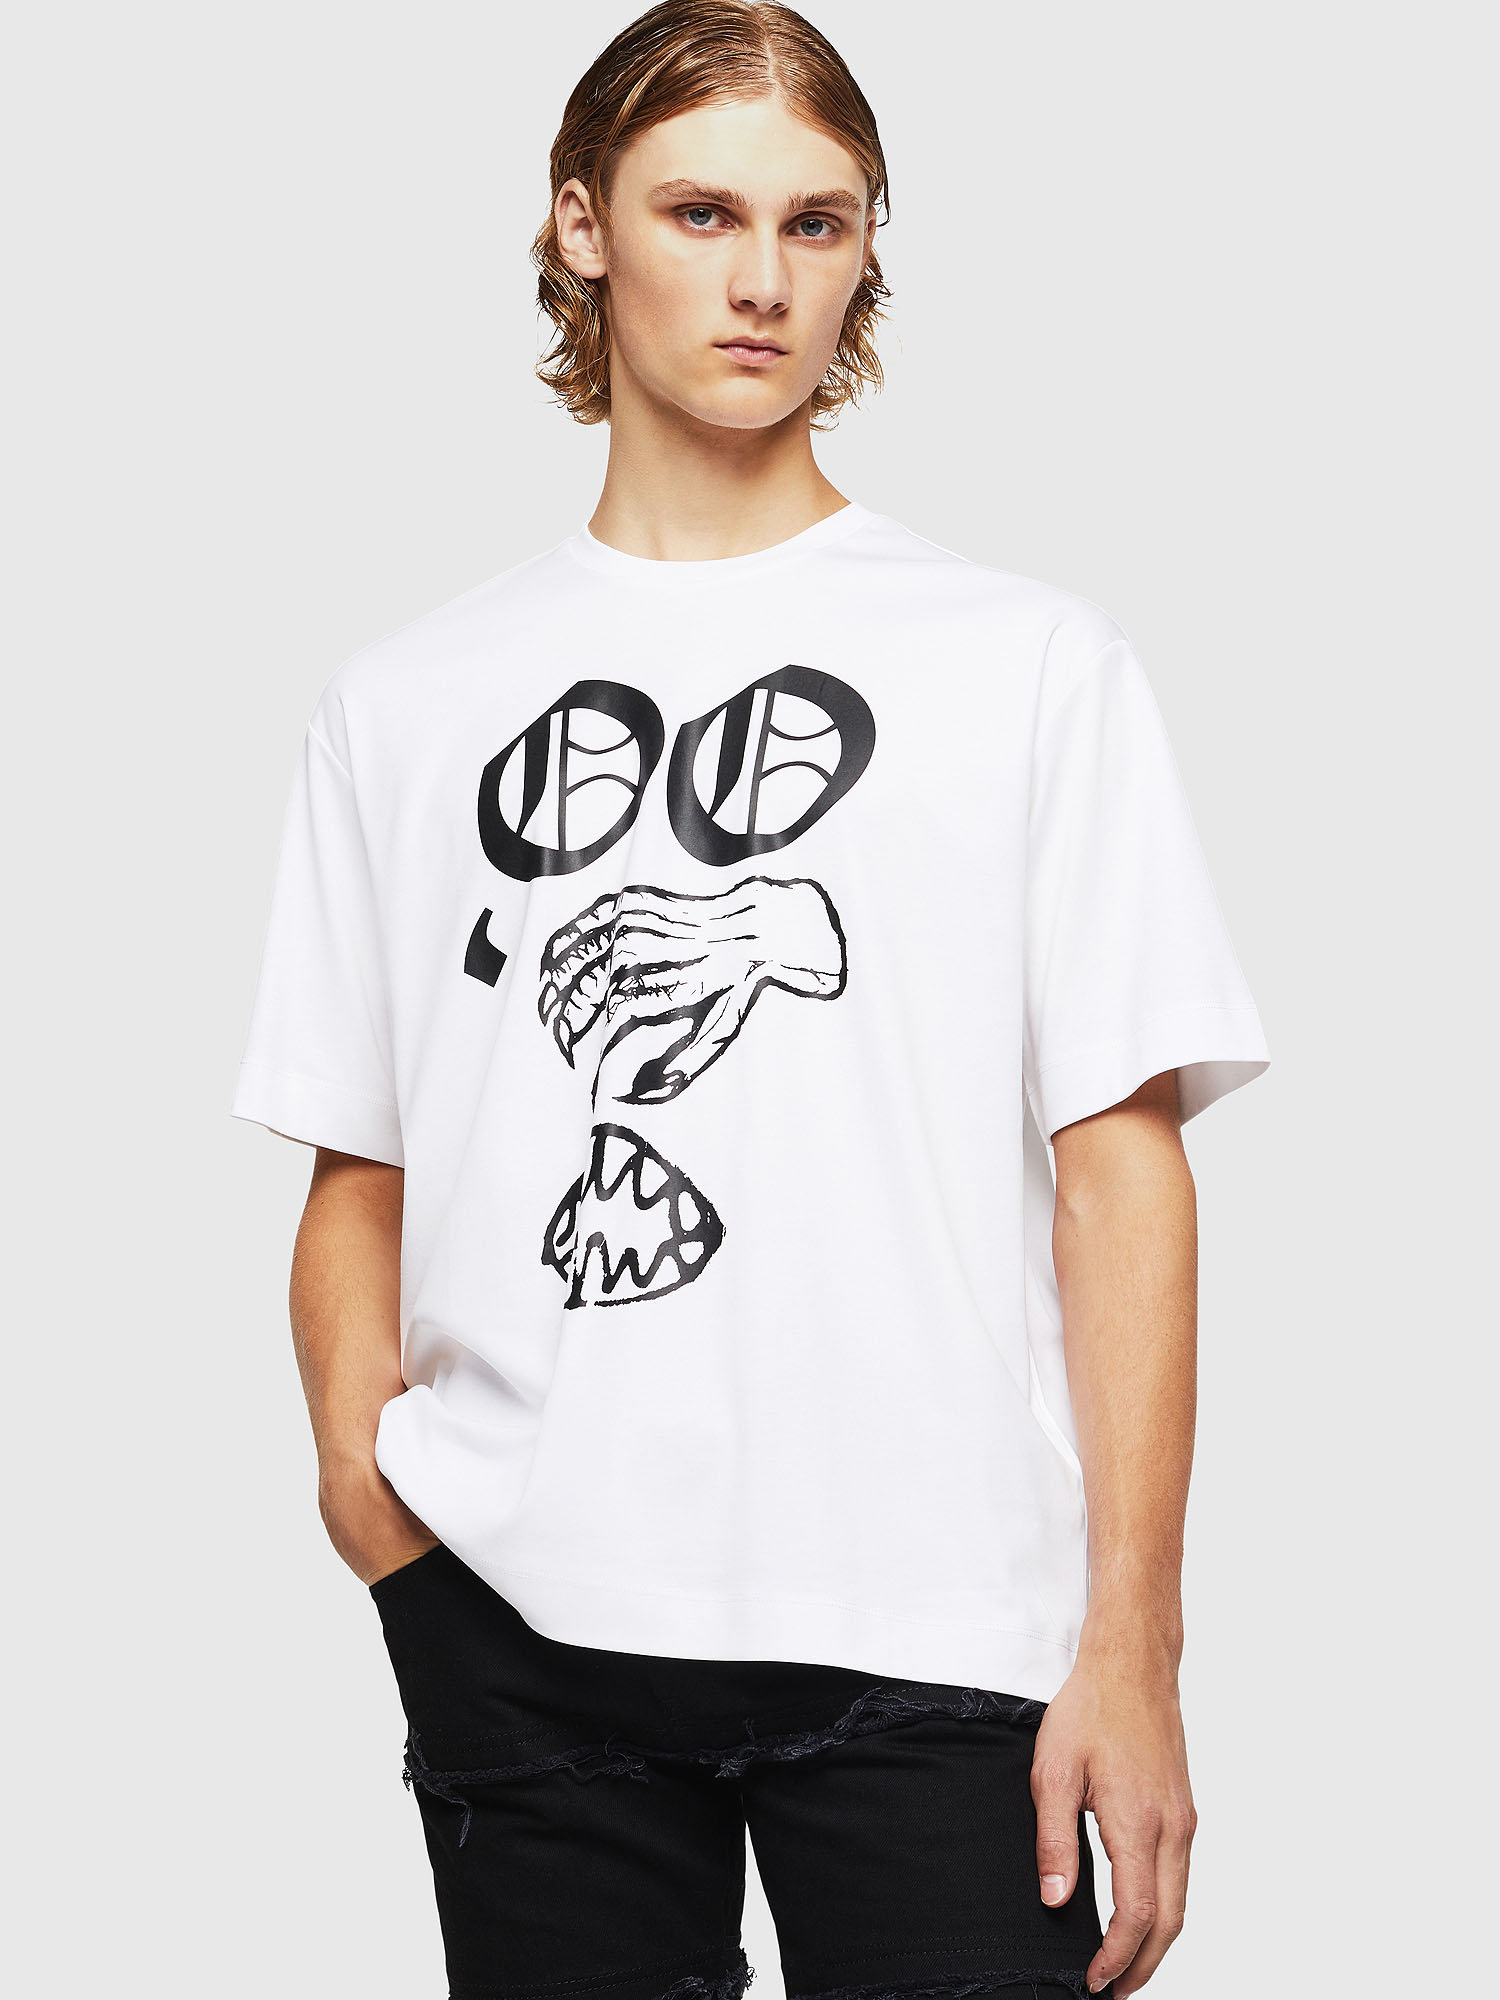 TEORIALE-X2 Men: T-shirt with face print | Diesel Black Gold